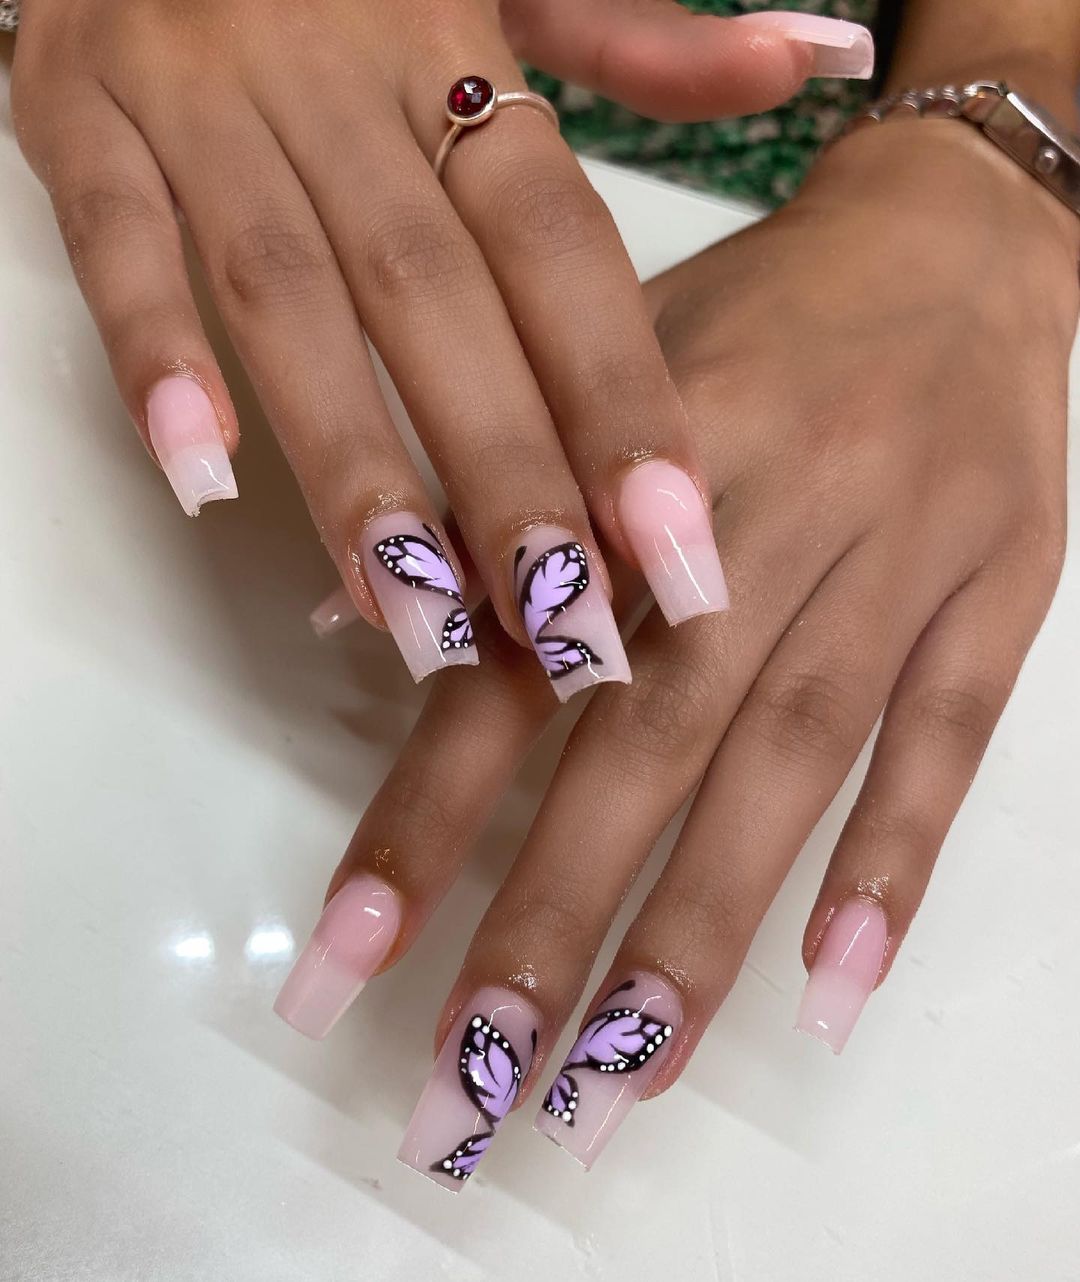 Y2K All Day: 10 2000s Nail Designs We Love